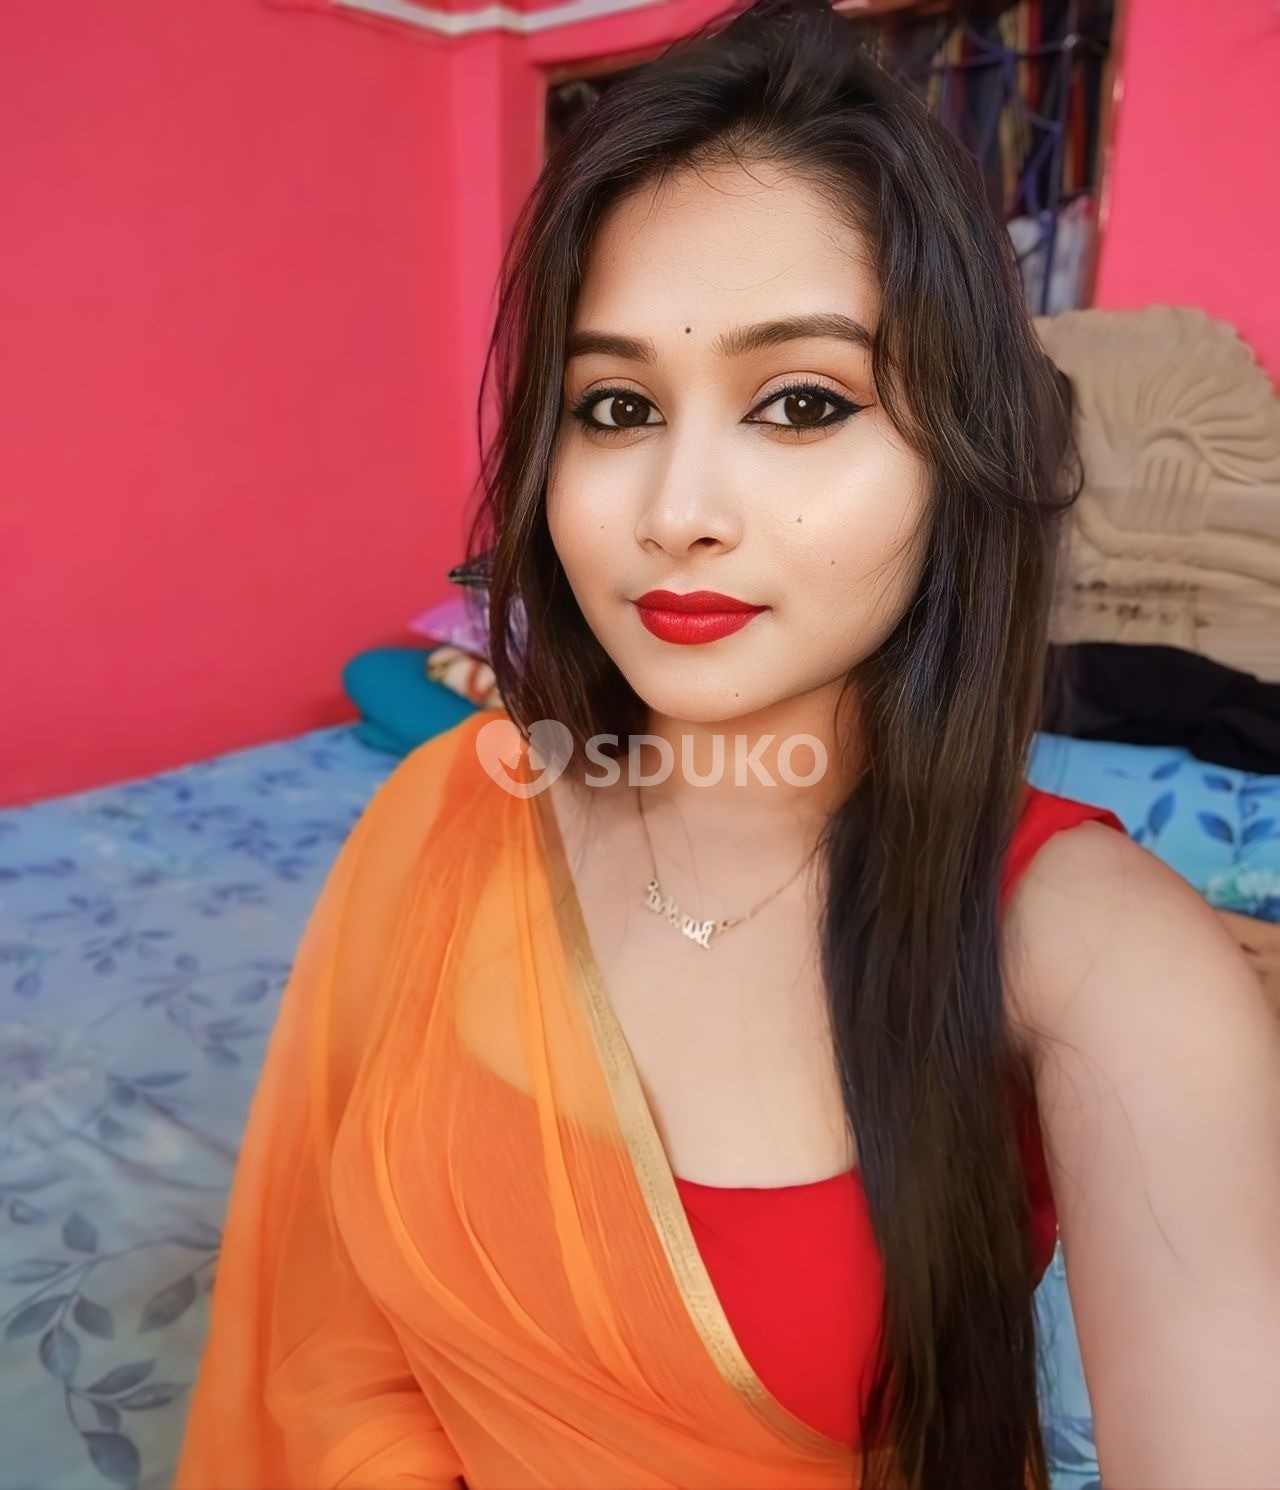 Live video 💚💐call full open nude video call sexy taking full open sexy taking 💓